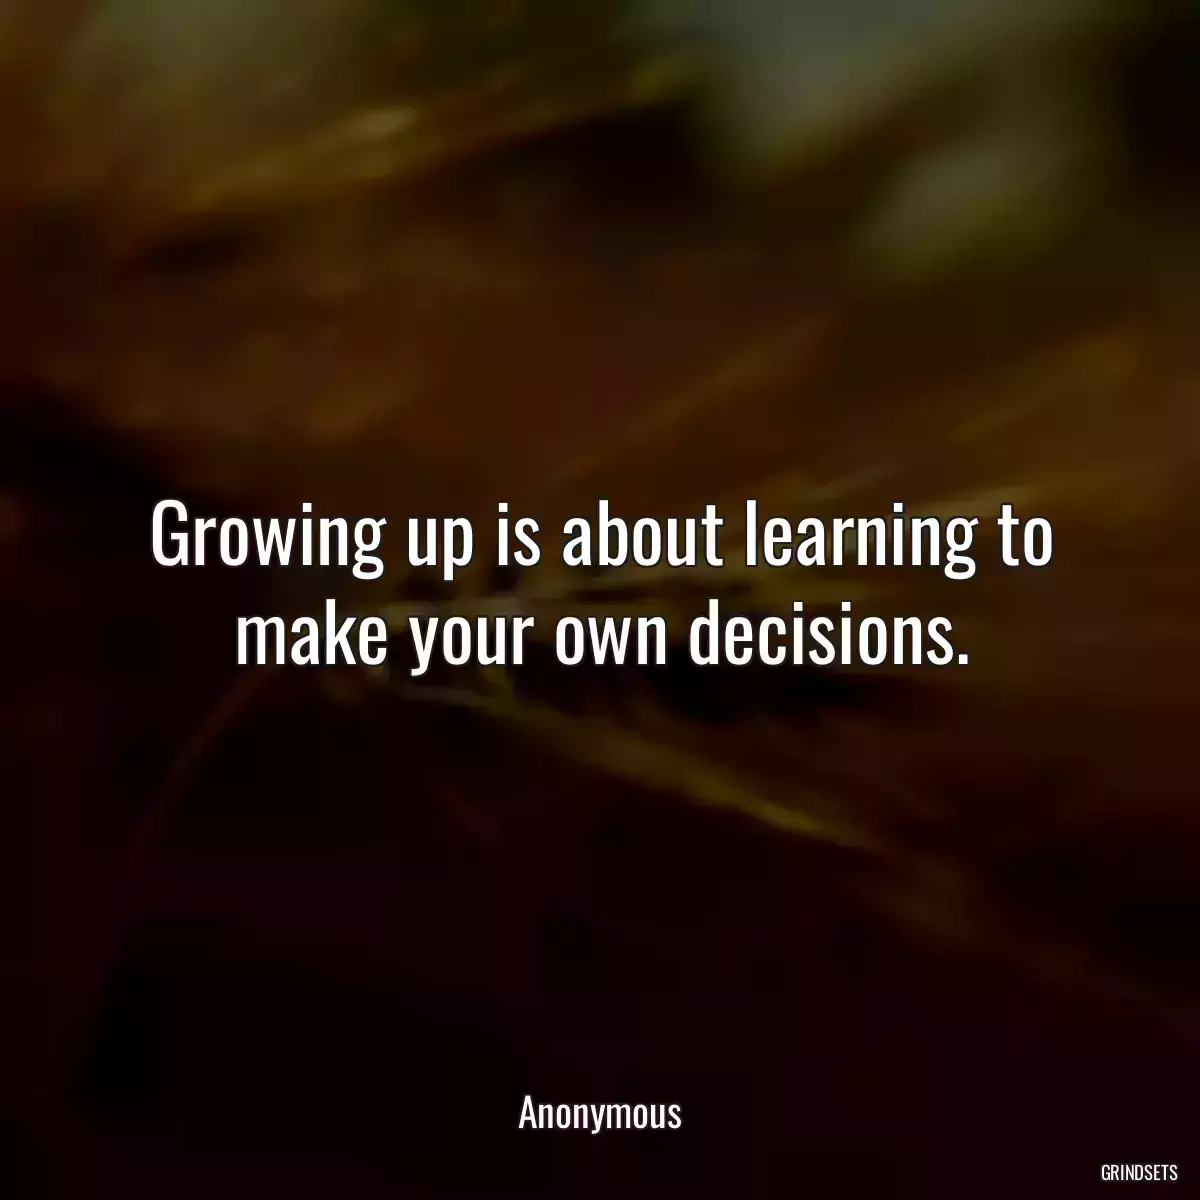 Growing up is about learning to make your own decisions.